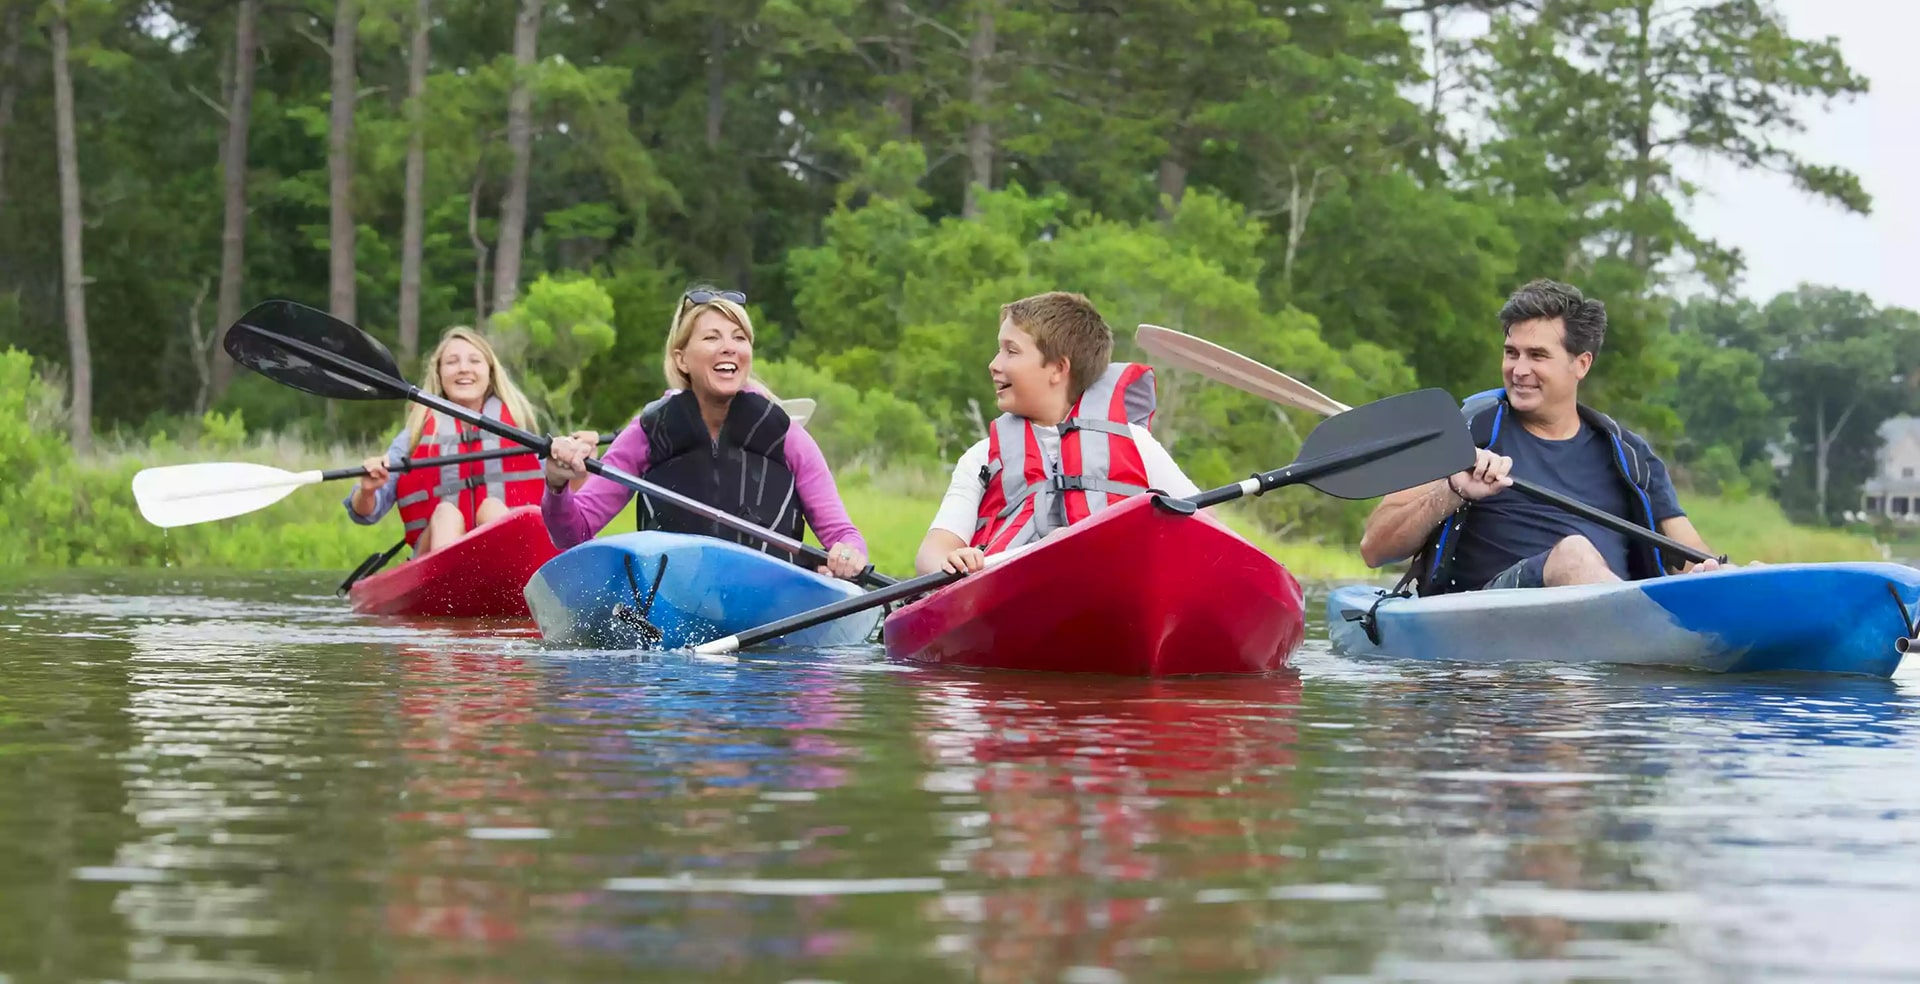 6 Best Touring Kayaks - Top Rated and Reviewed (Summer 2022) .